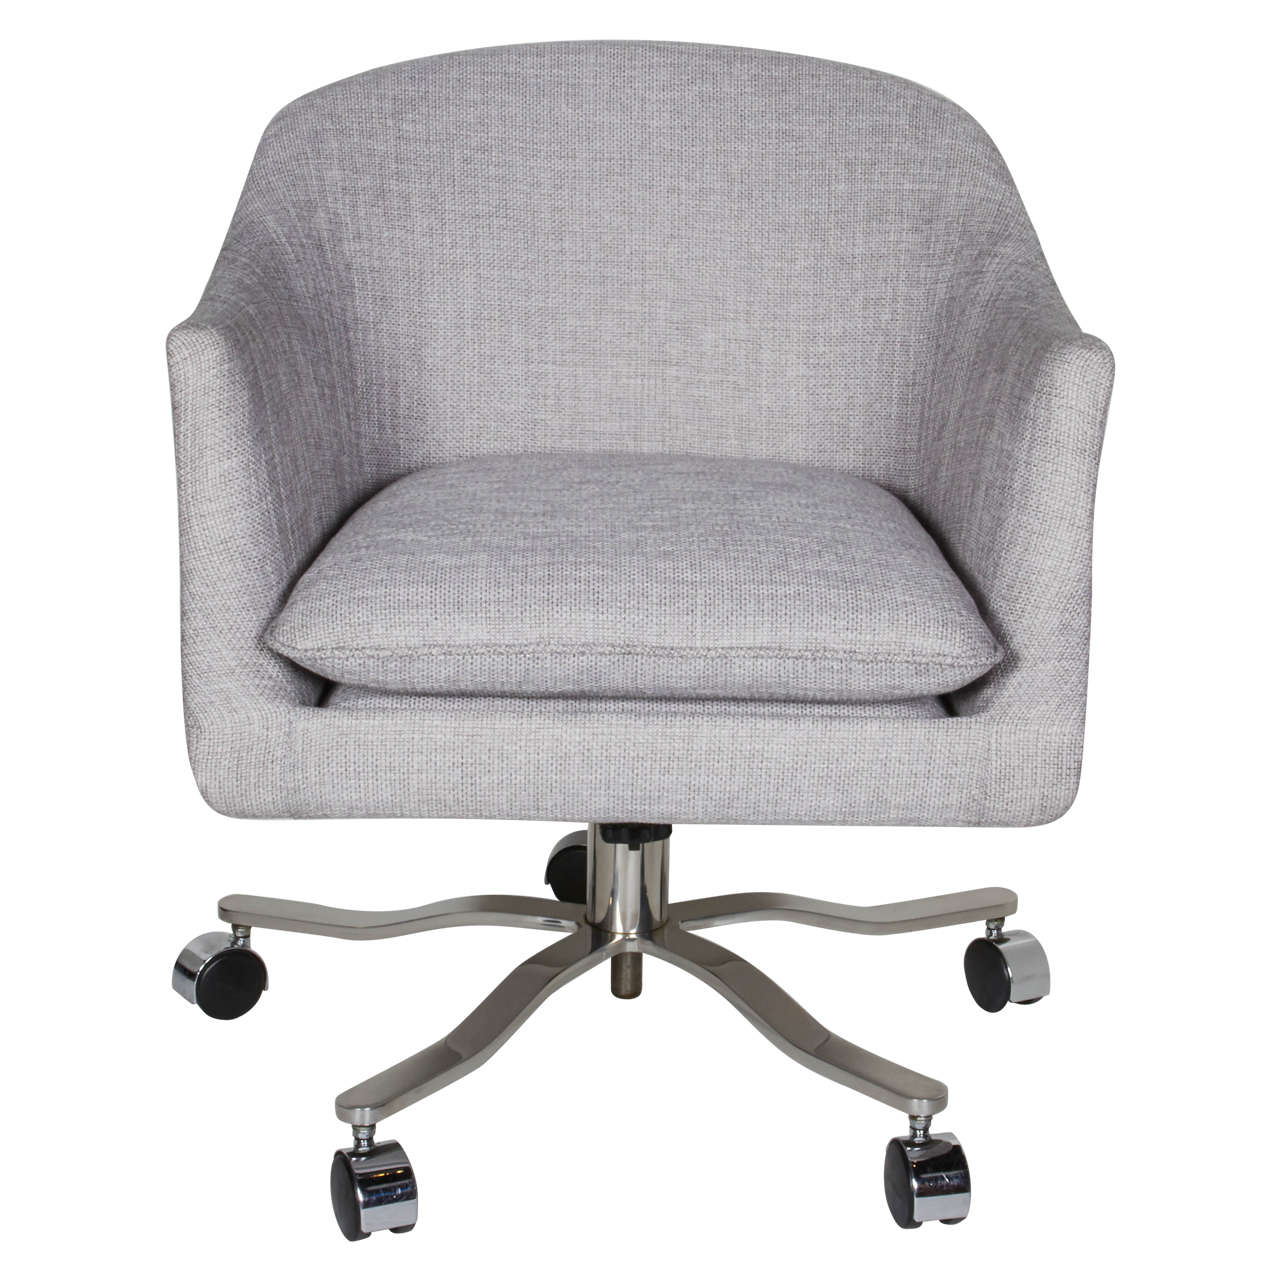 Midcentury desk chair with barrel back form. Elegant seamless shape that can swivel 360° and the height of the seat can be adjusted via the corkscrew centre rod. Upholstered in an elegant light grey woven fabric, with removable seat cushion. The